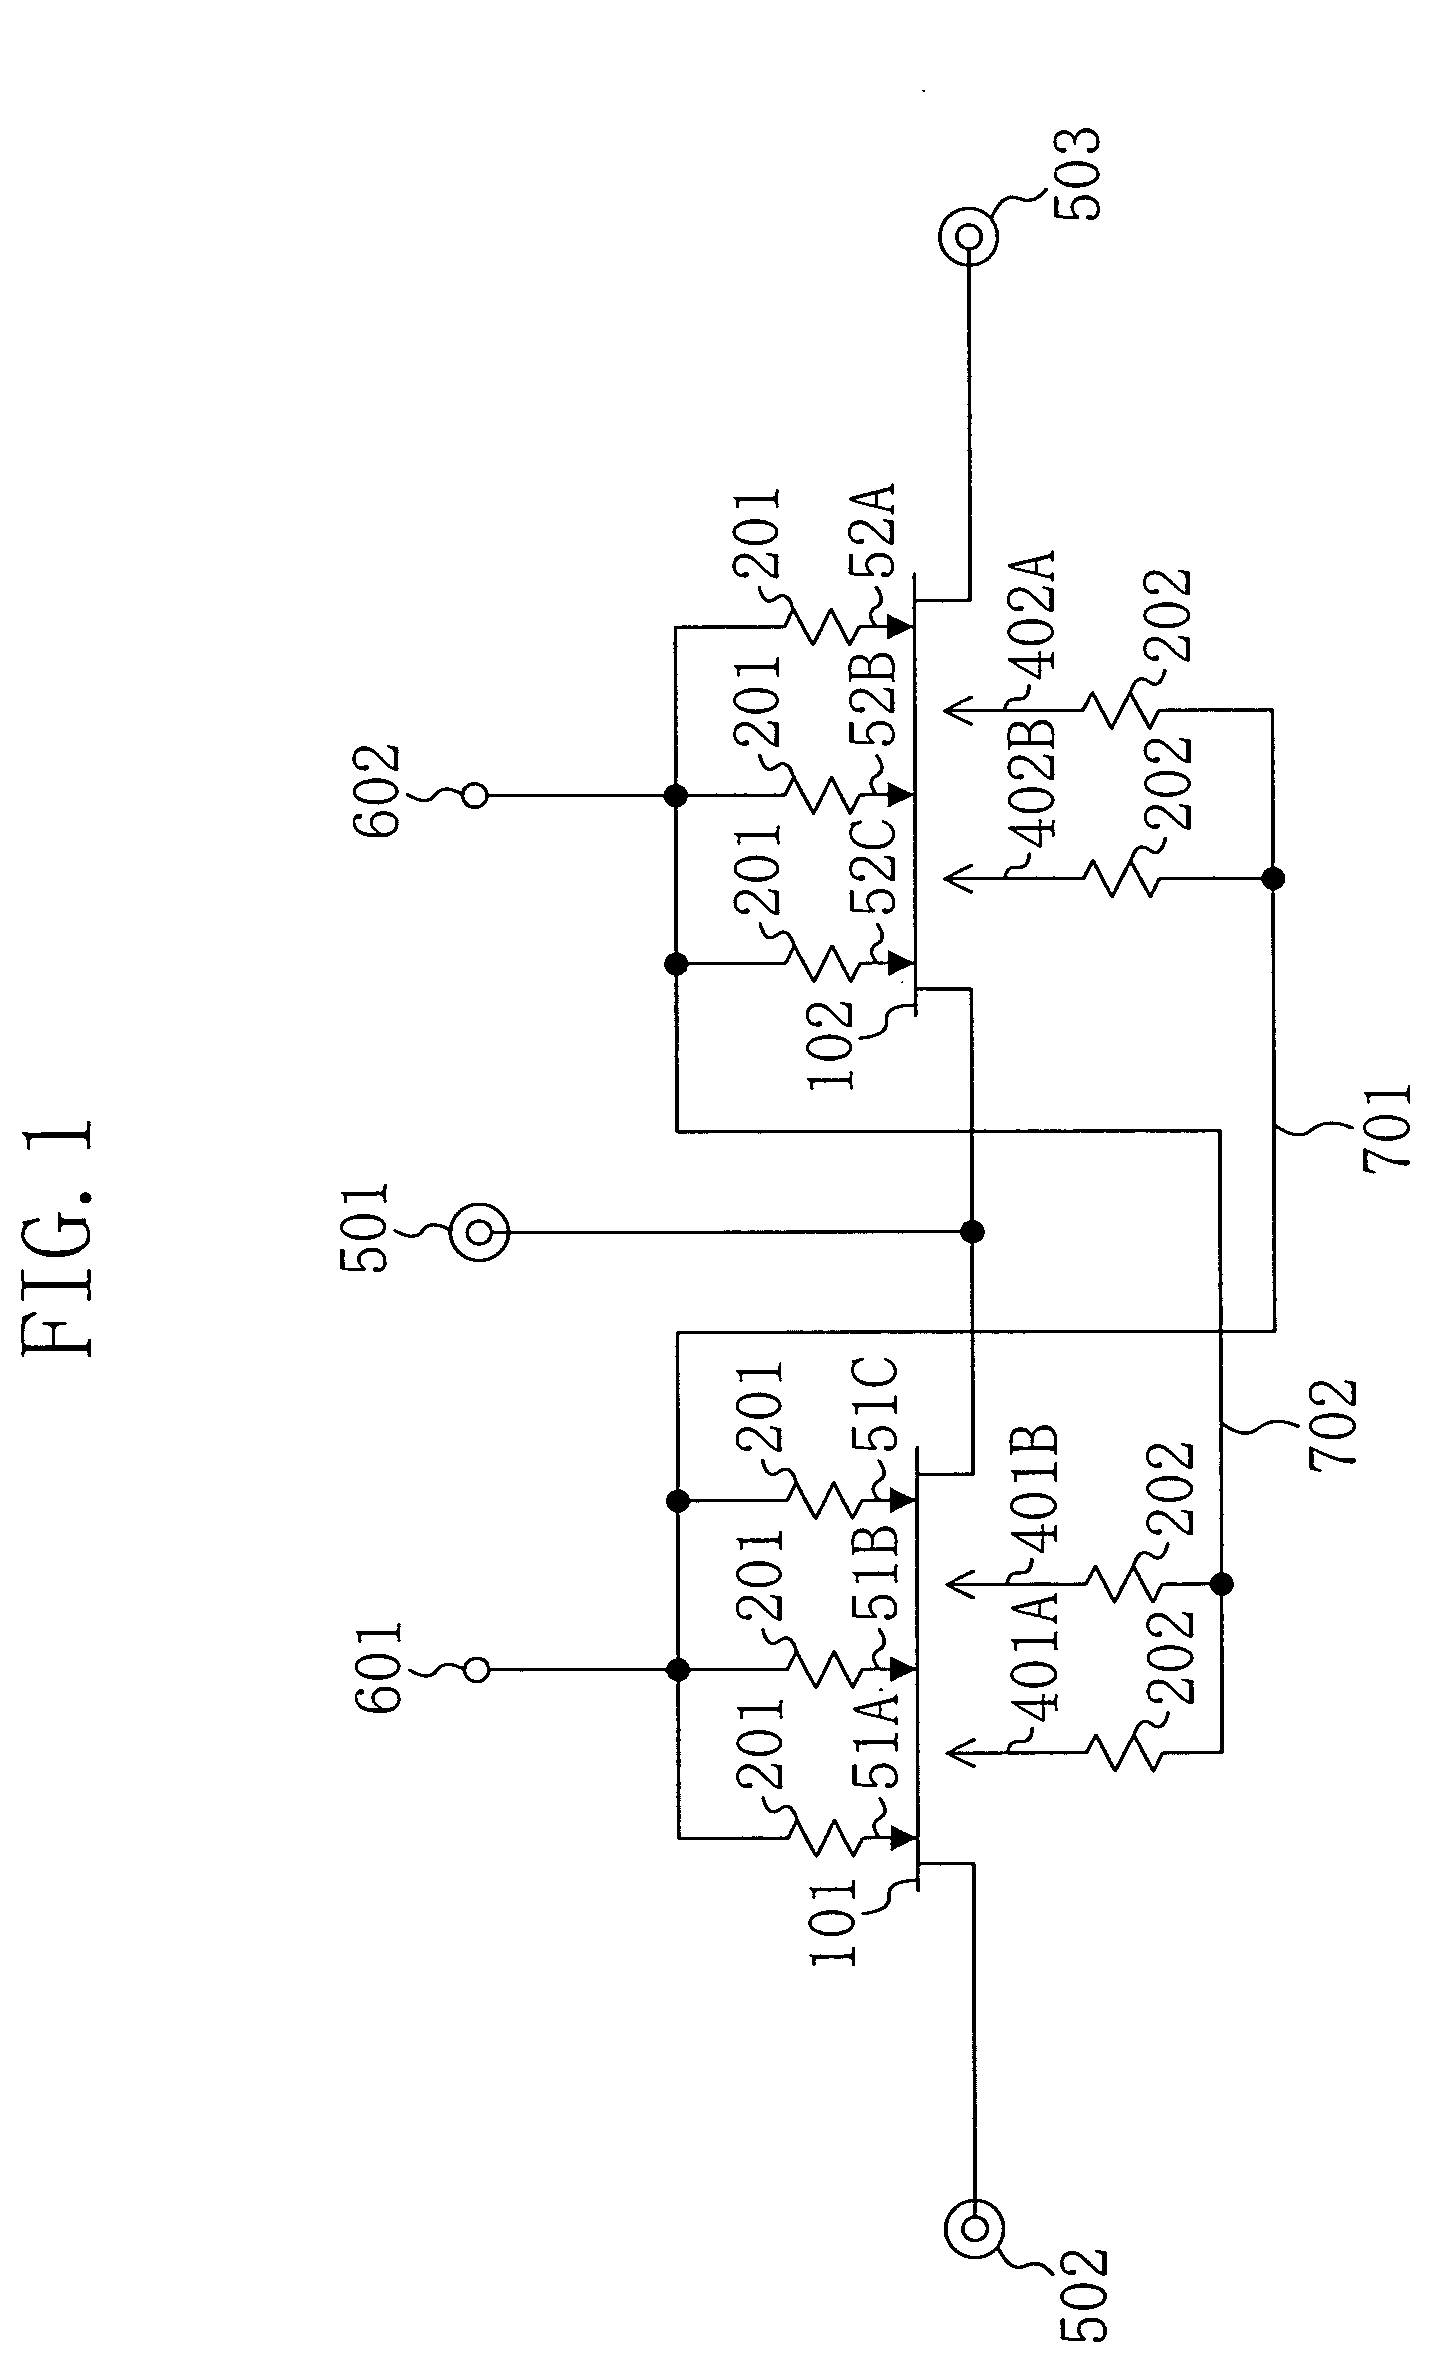 RF switching circuit for use in mobile communication systems